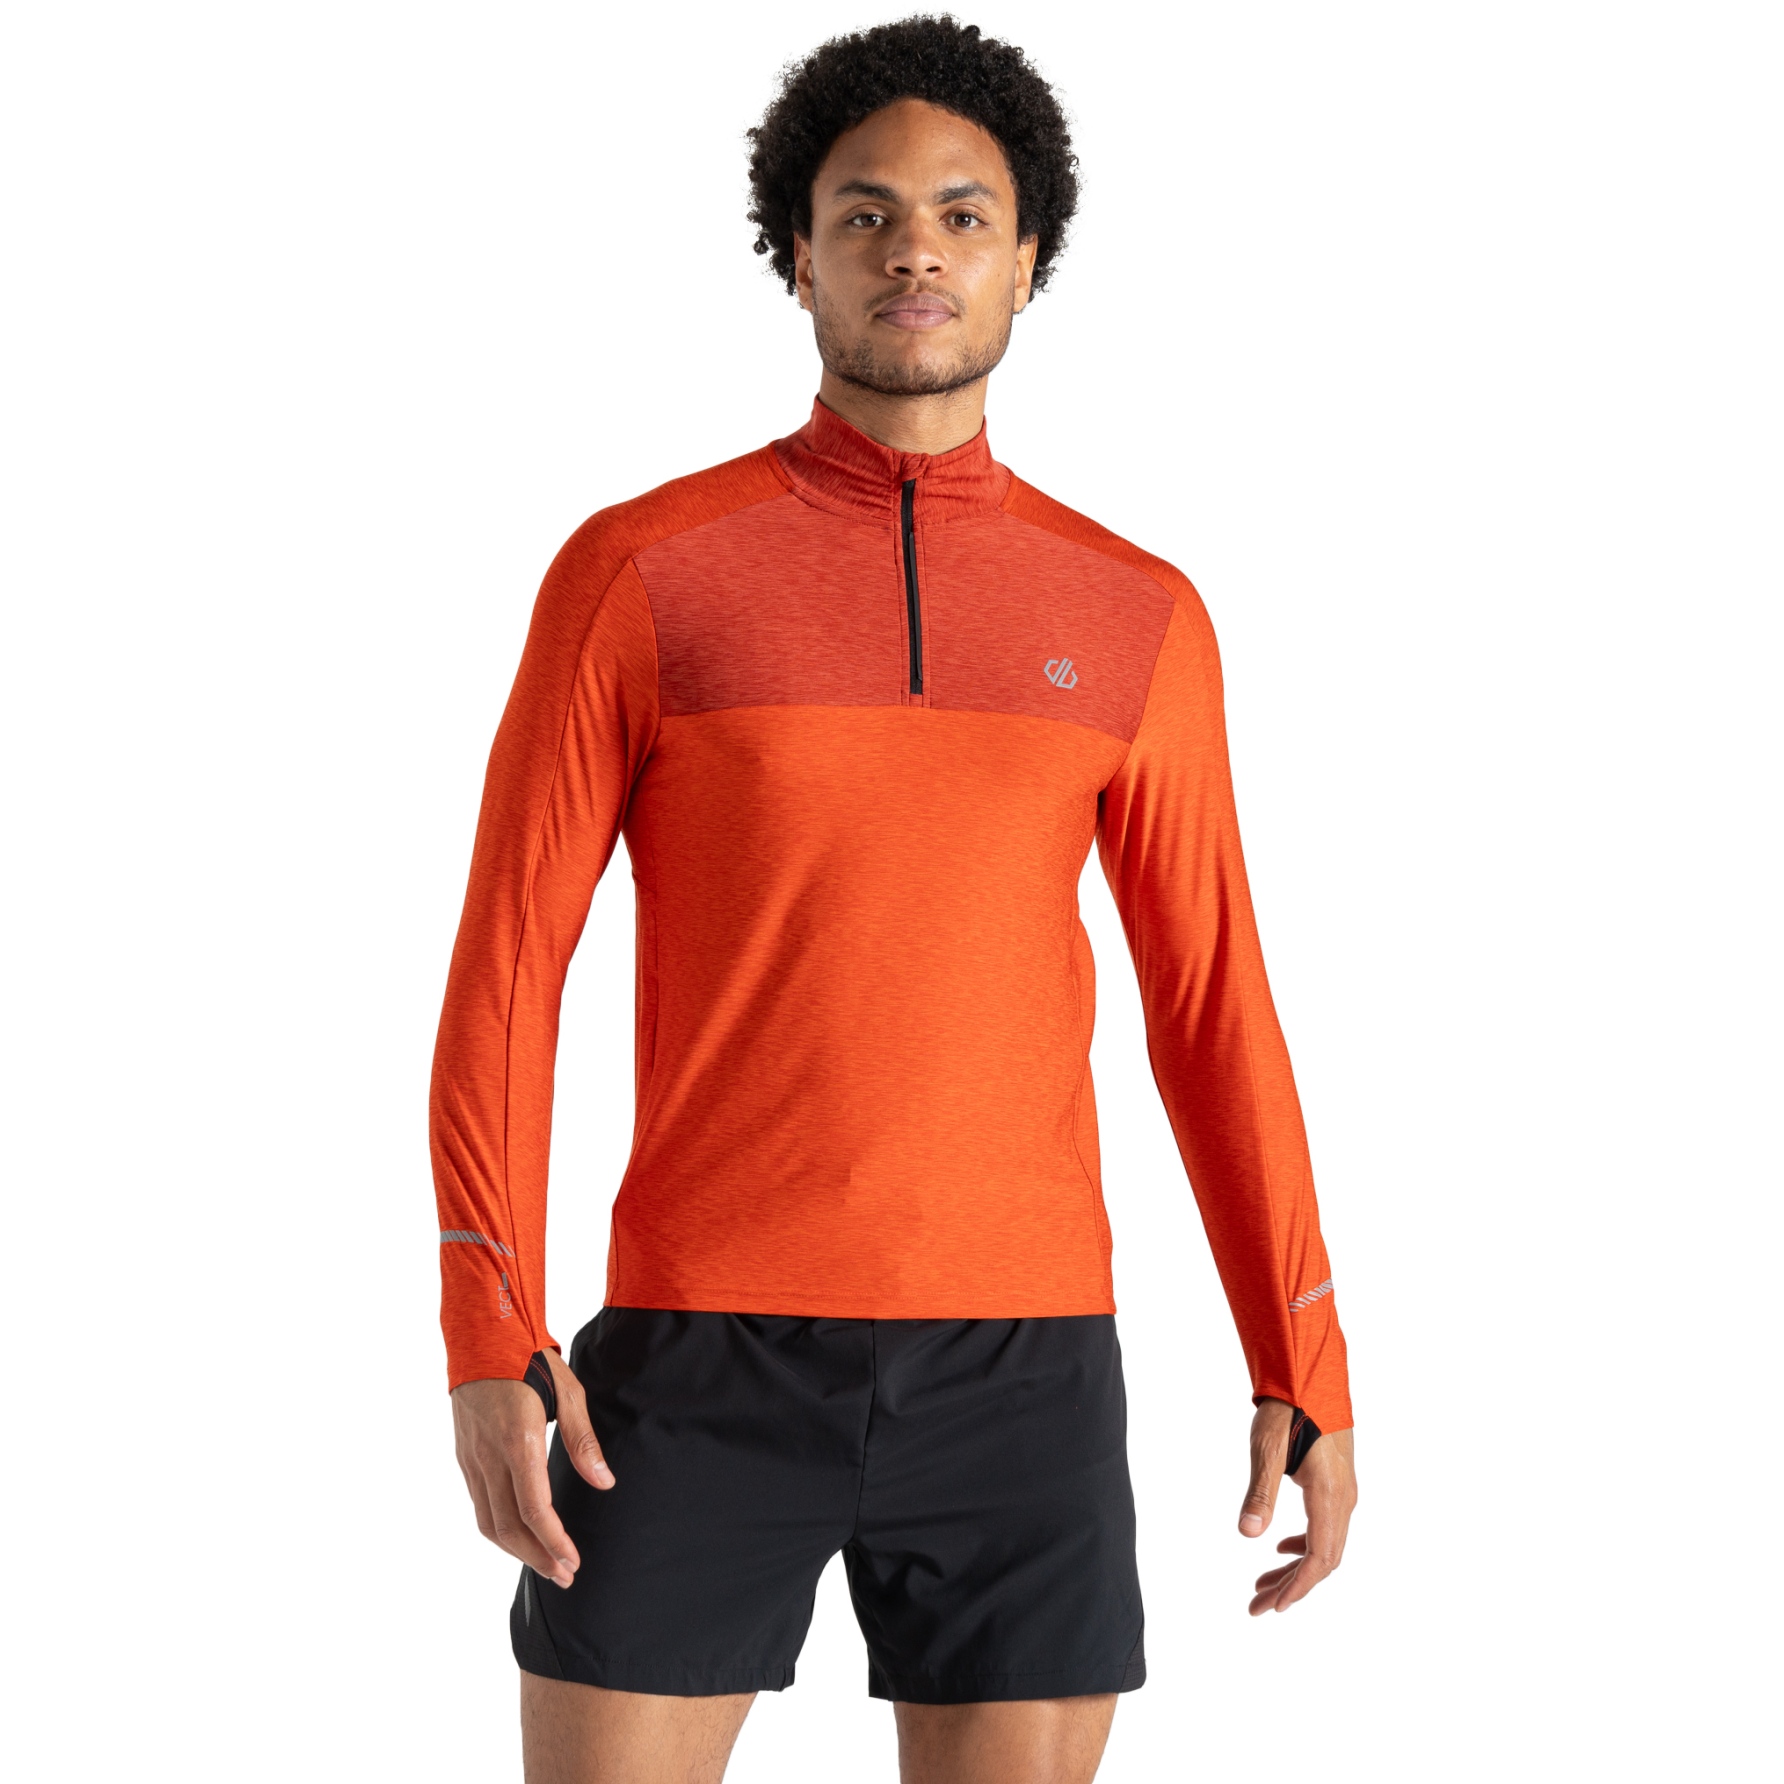 Picture of Dare 2b Power Up II Jersey Men - K0P Cinnamon Marl/Tuscan Red Marl